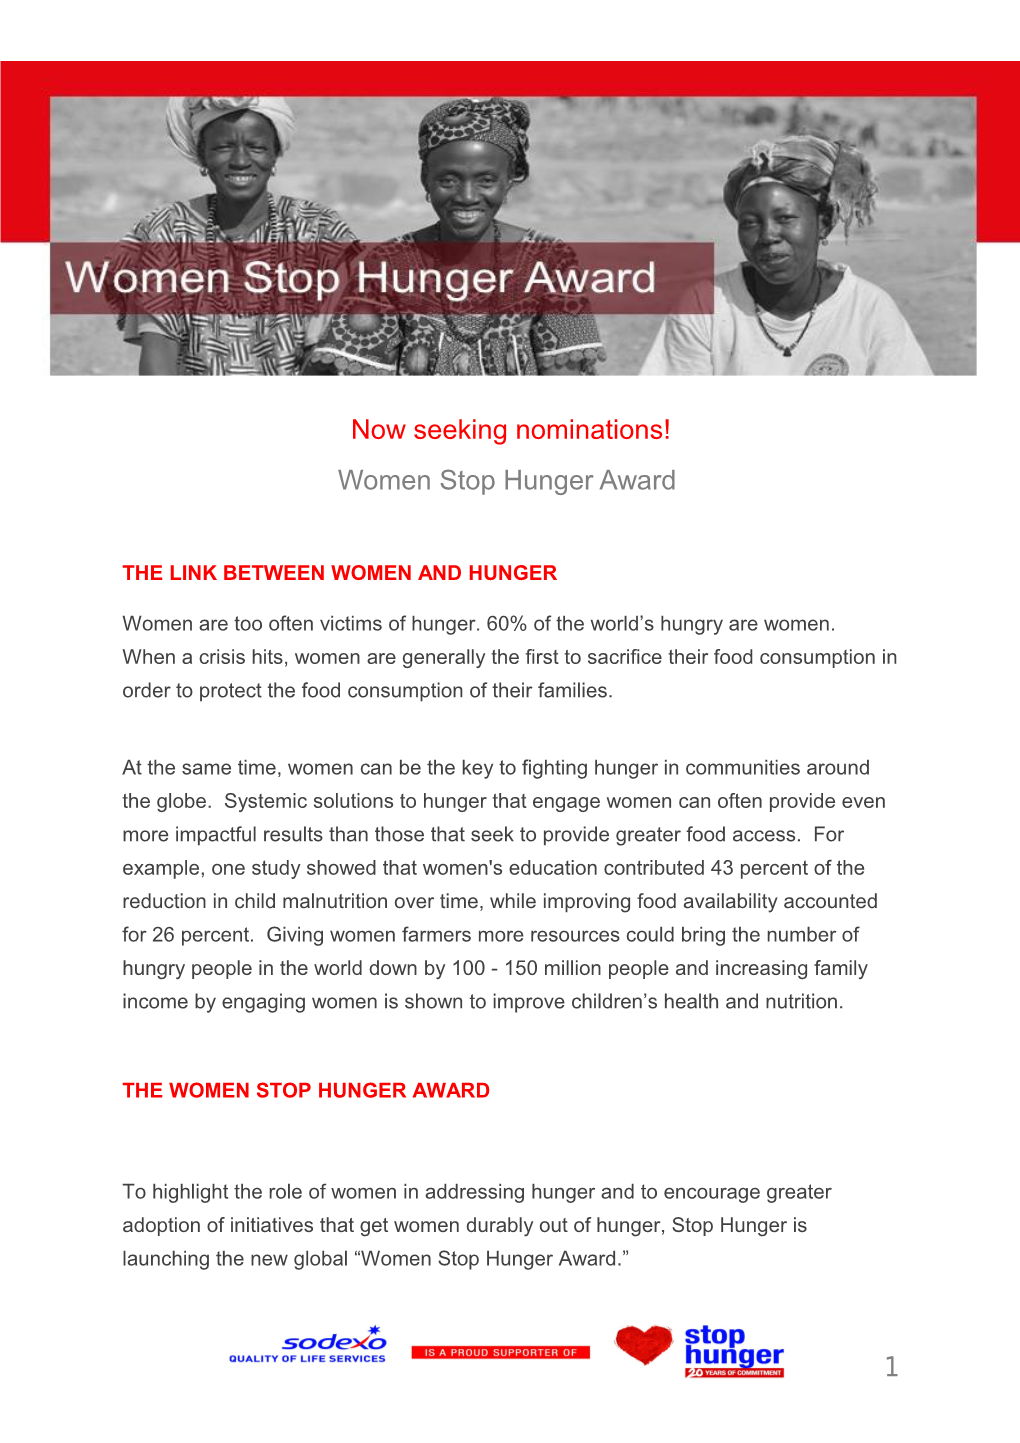 The Link Between Women and Hunger